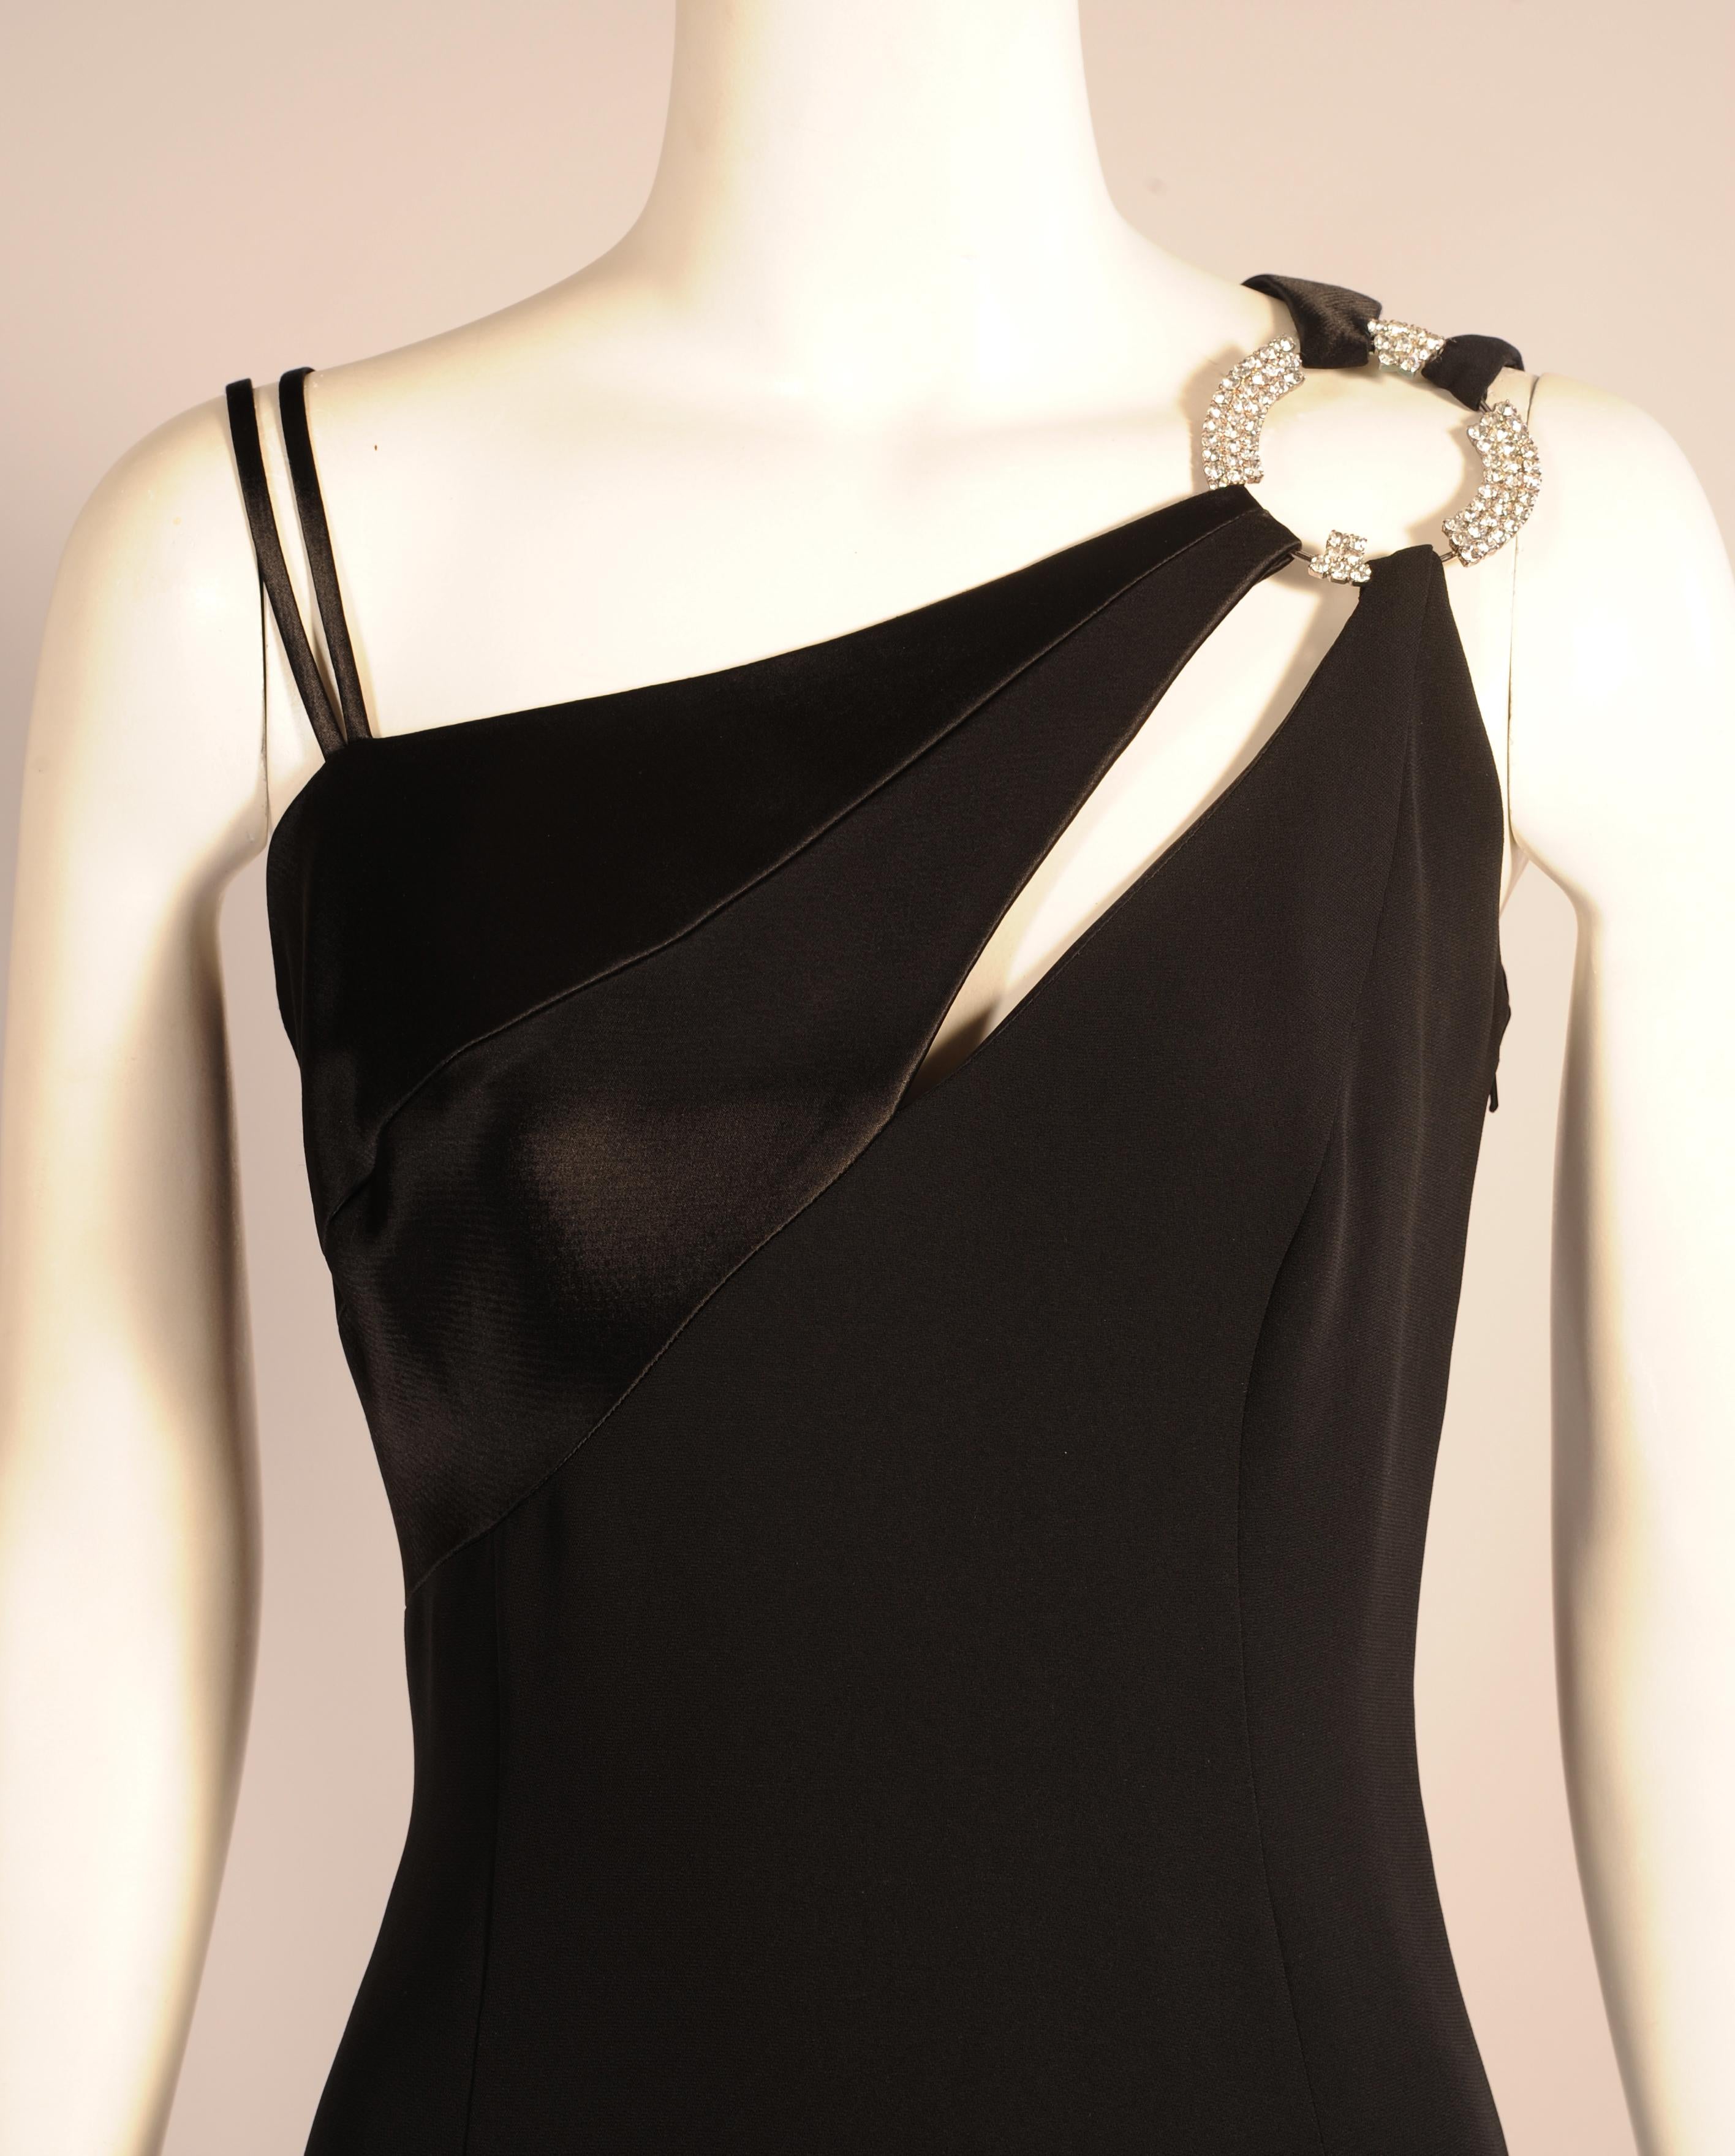 This sleek black silk crepe evening gown from the Milan based Italian designer Raffaella Curiel has an interesting neckline. There are two narrow strap on the right shoulder and a band of black silk satin which is fastened to a jewelled ornament on